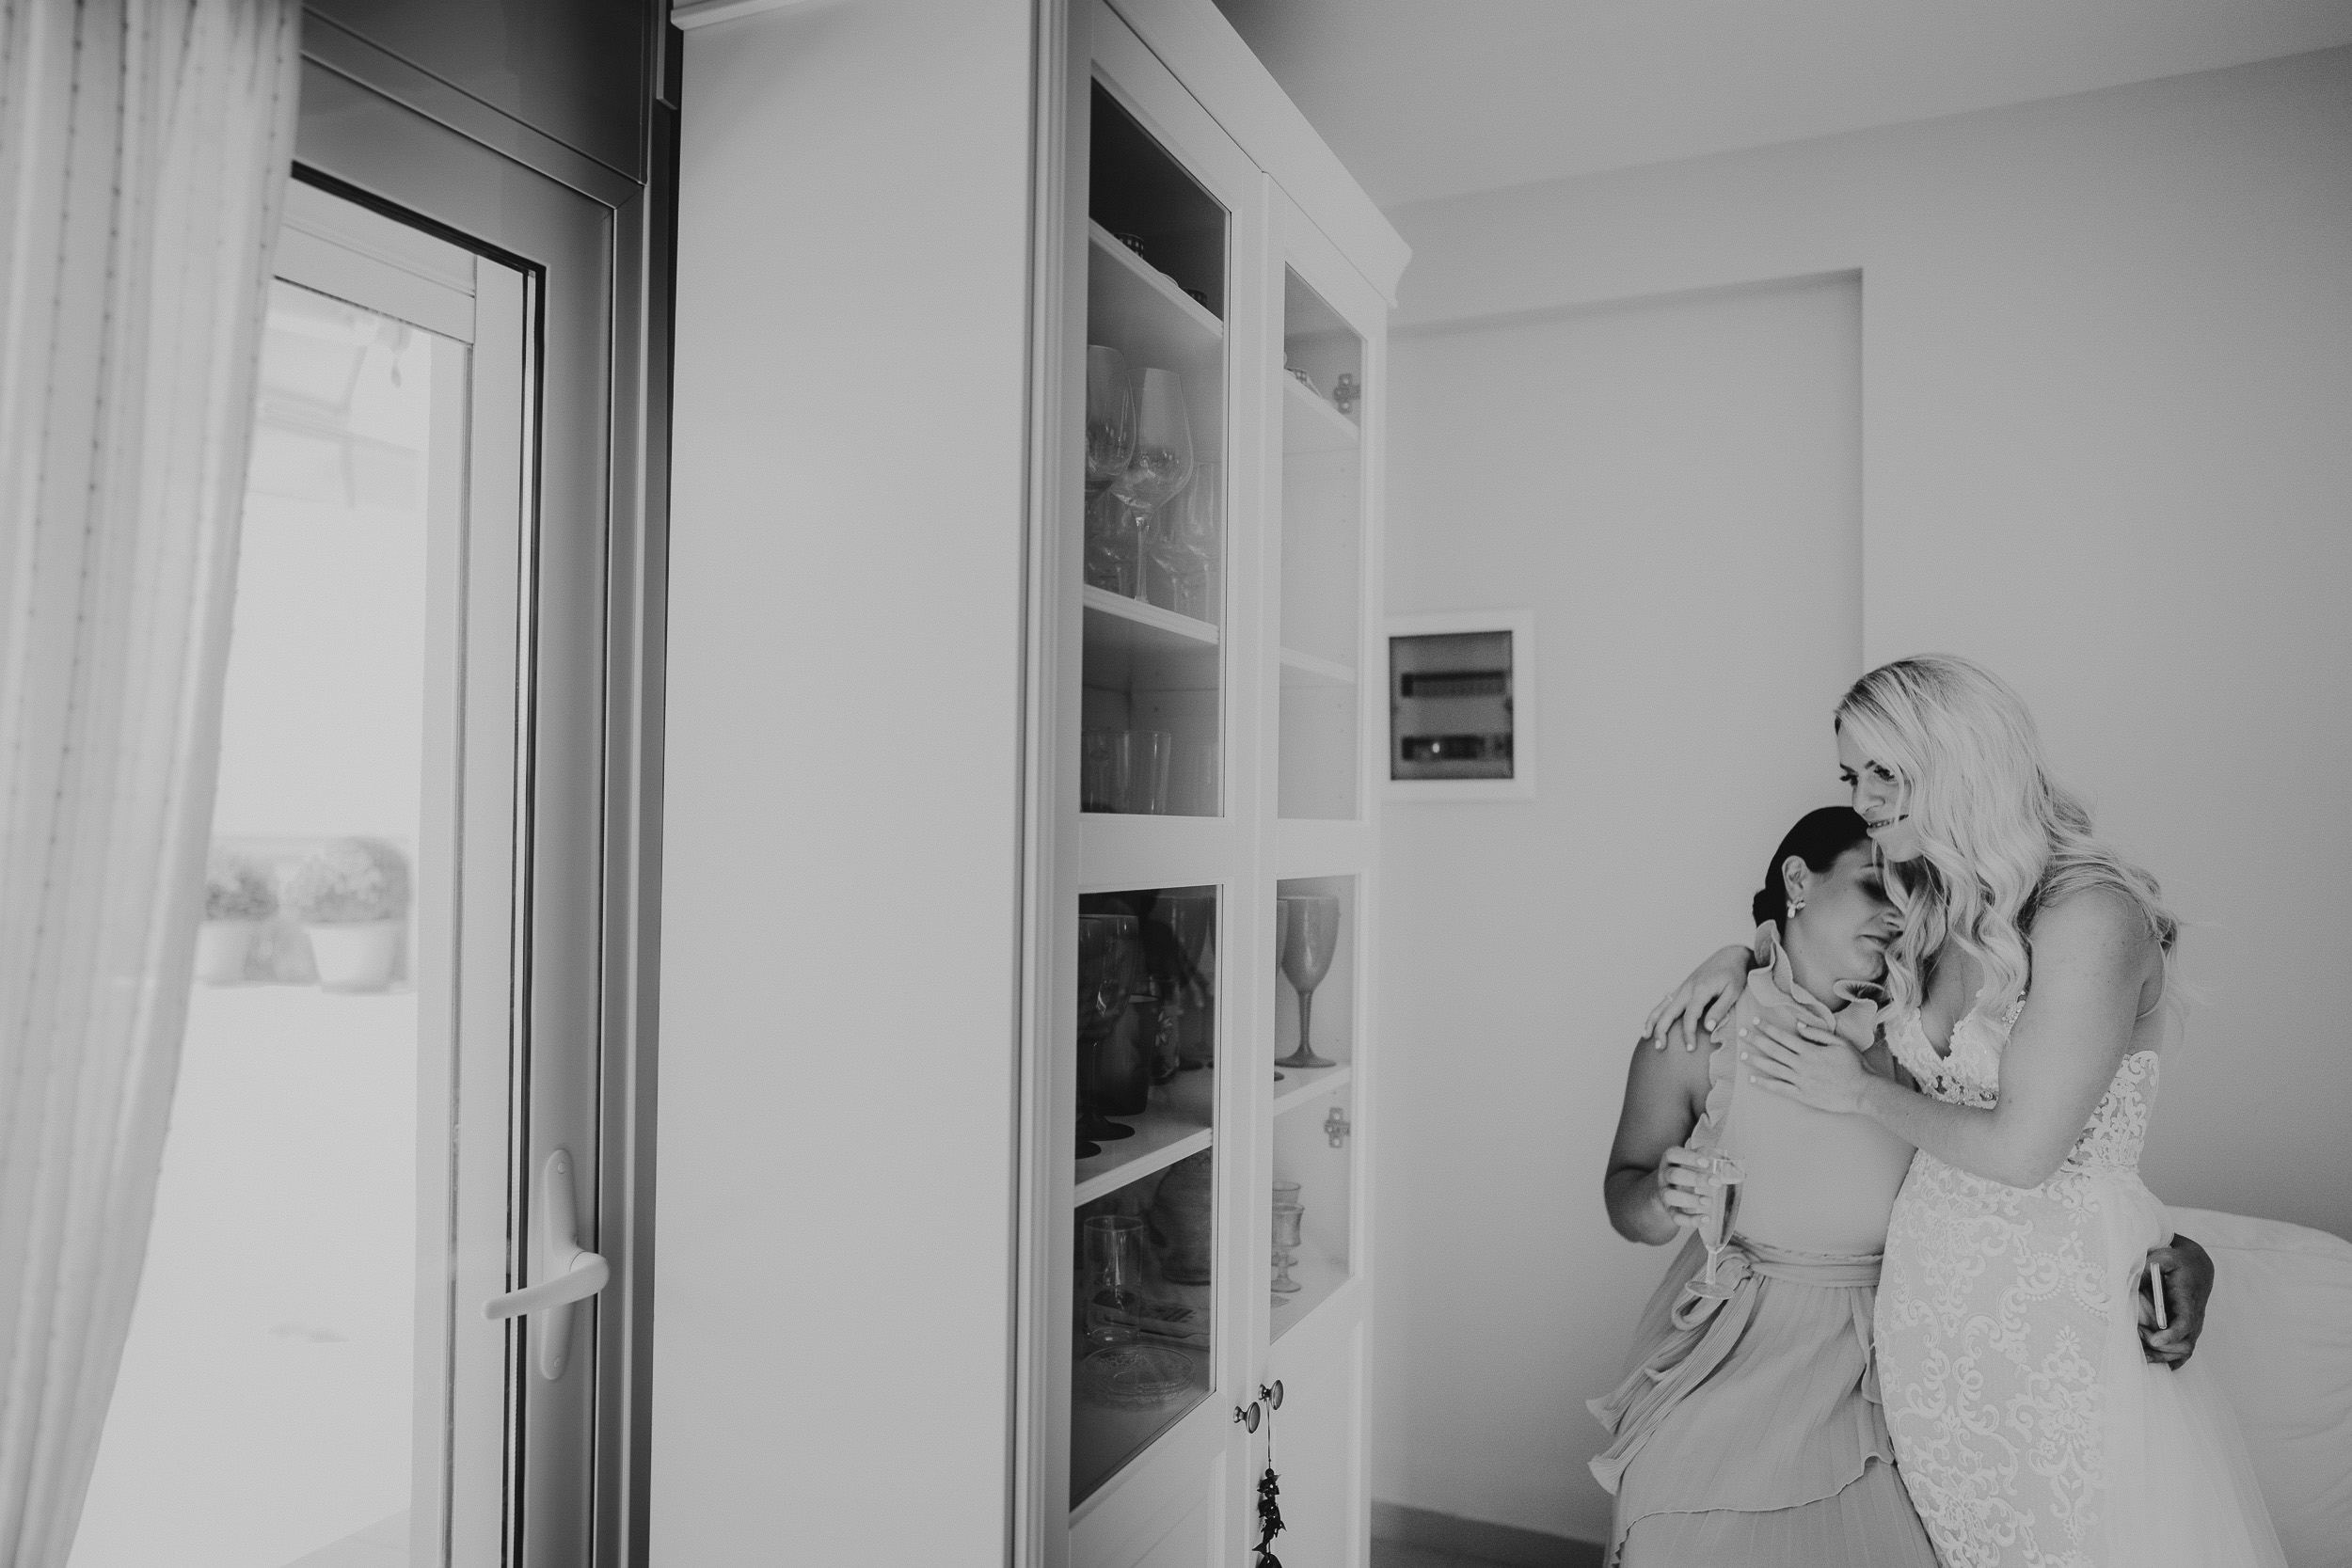 A bride is hugging her bridesmaid in a black and white wedding photo.